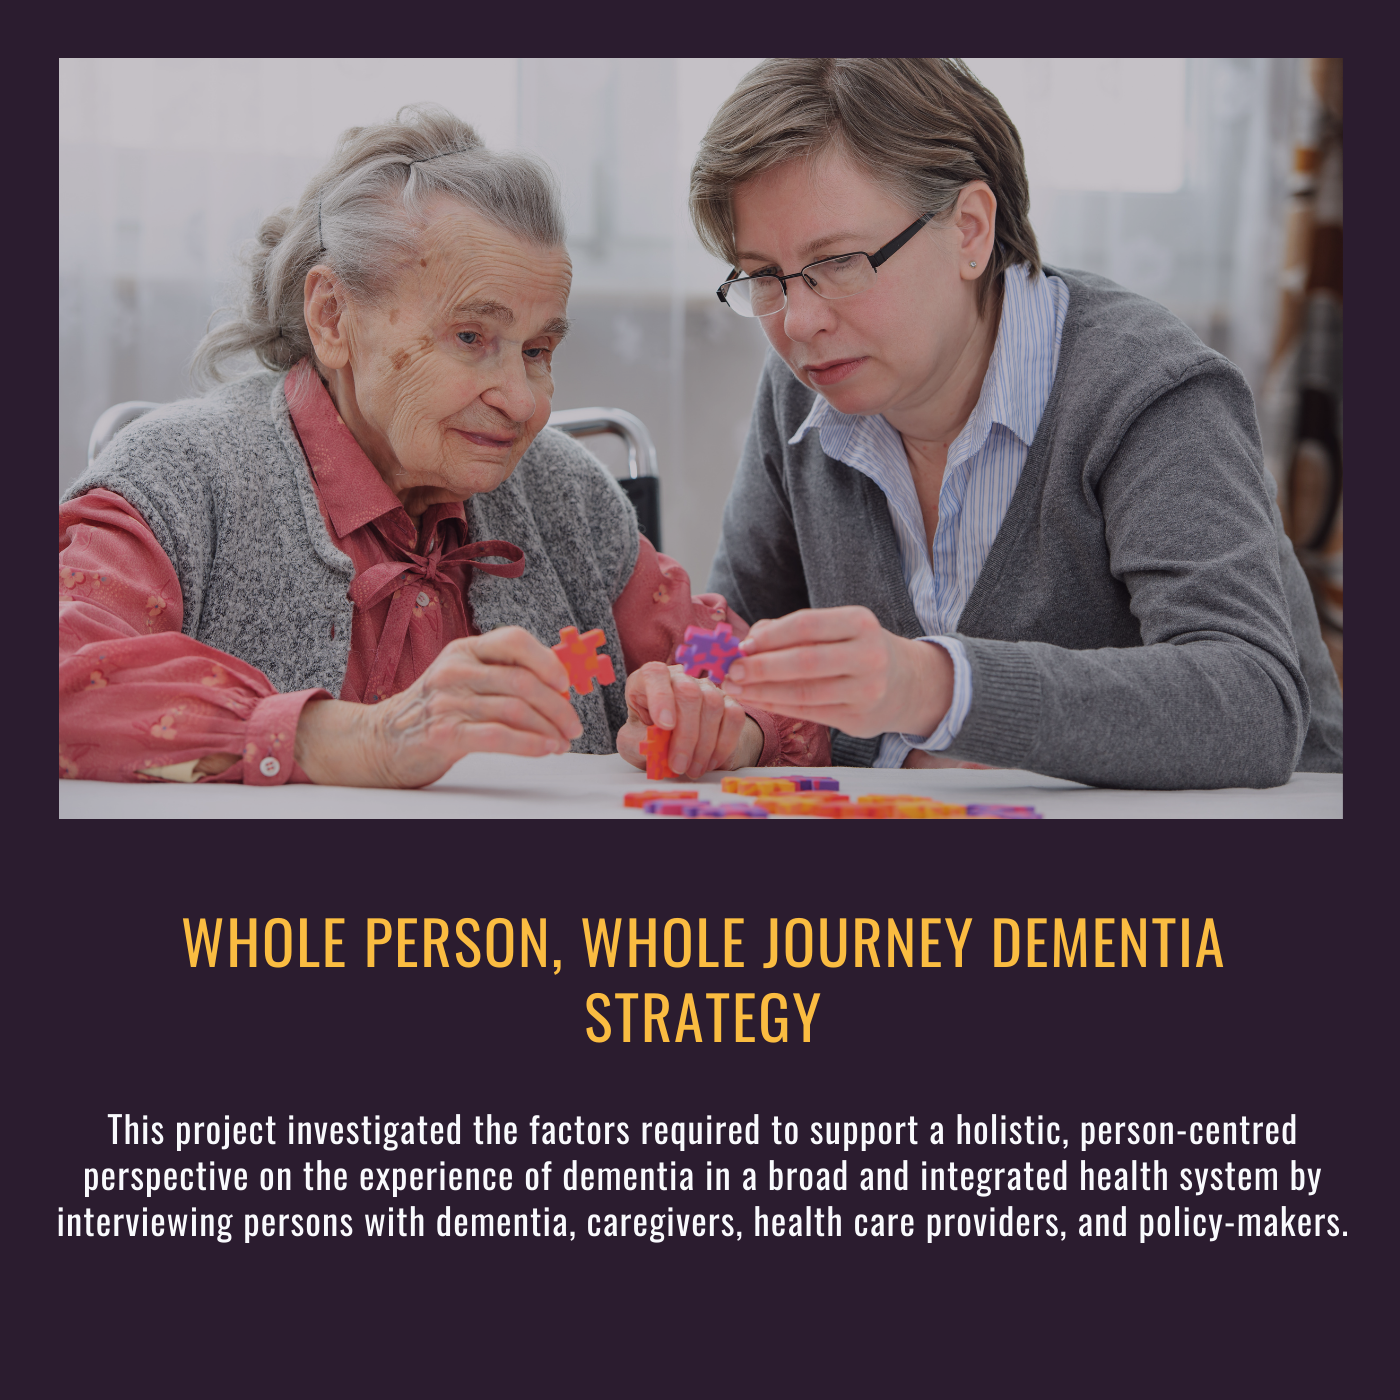 Whole person whole journey dementia strategy